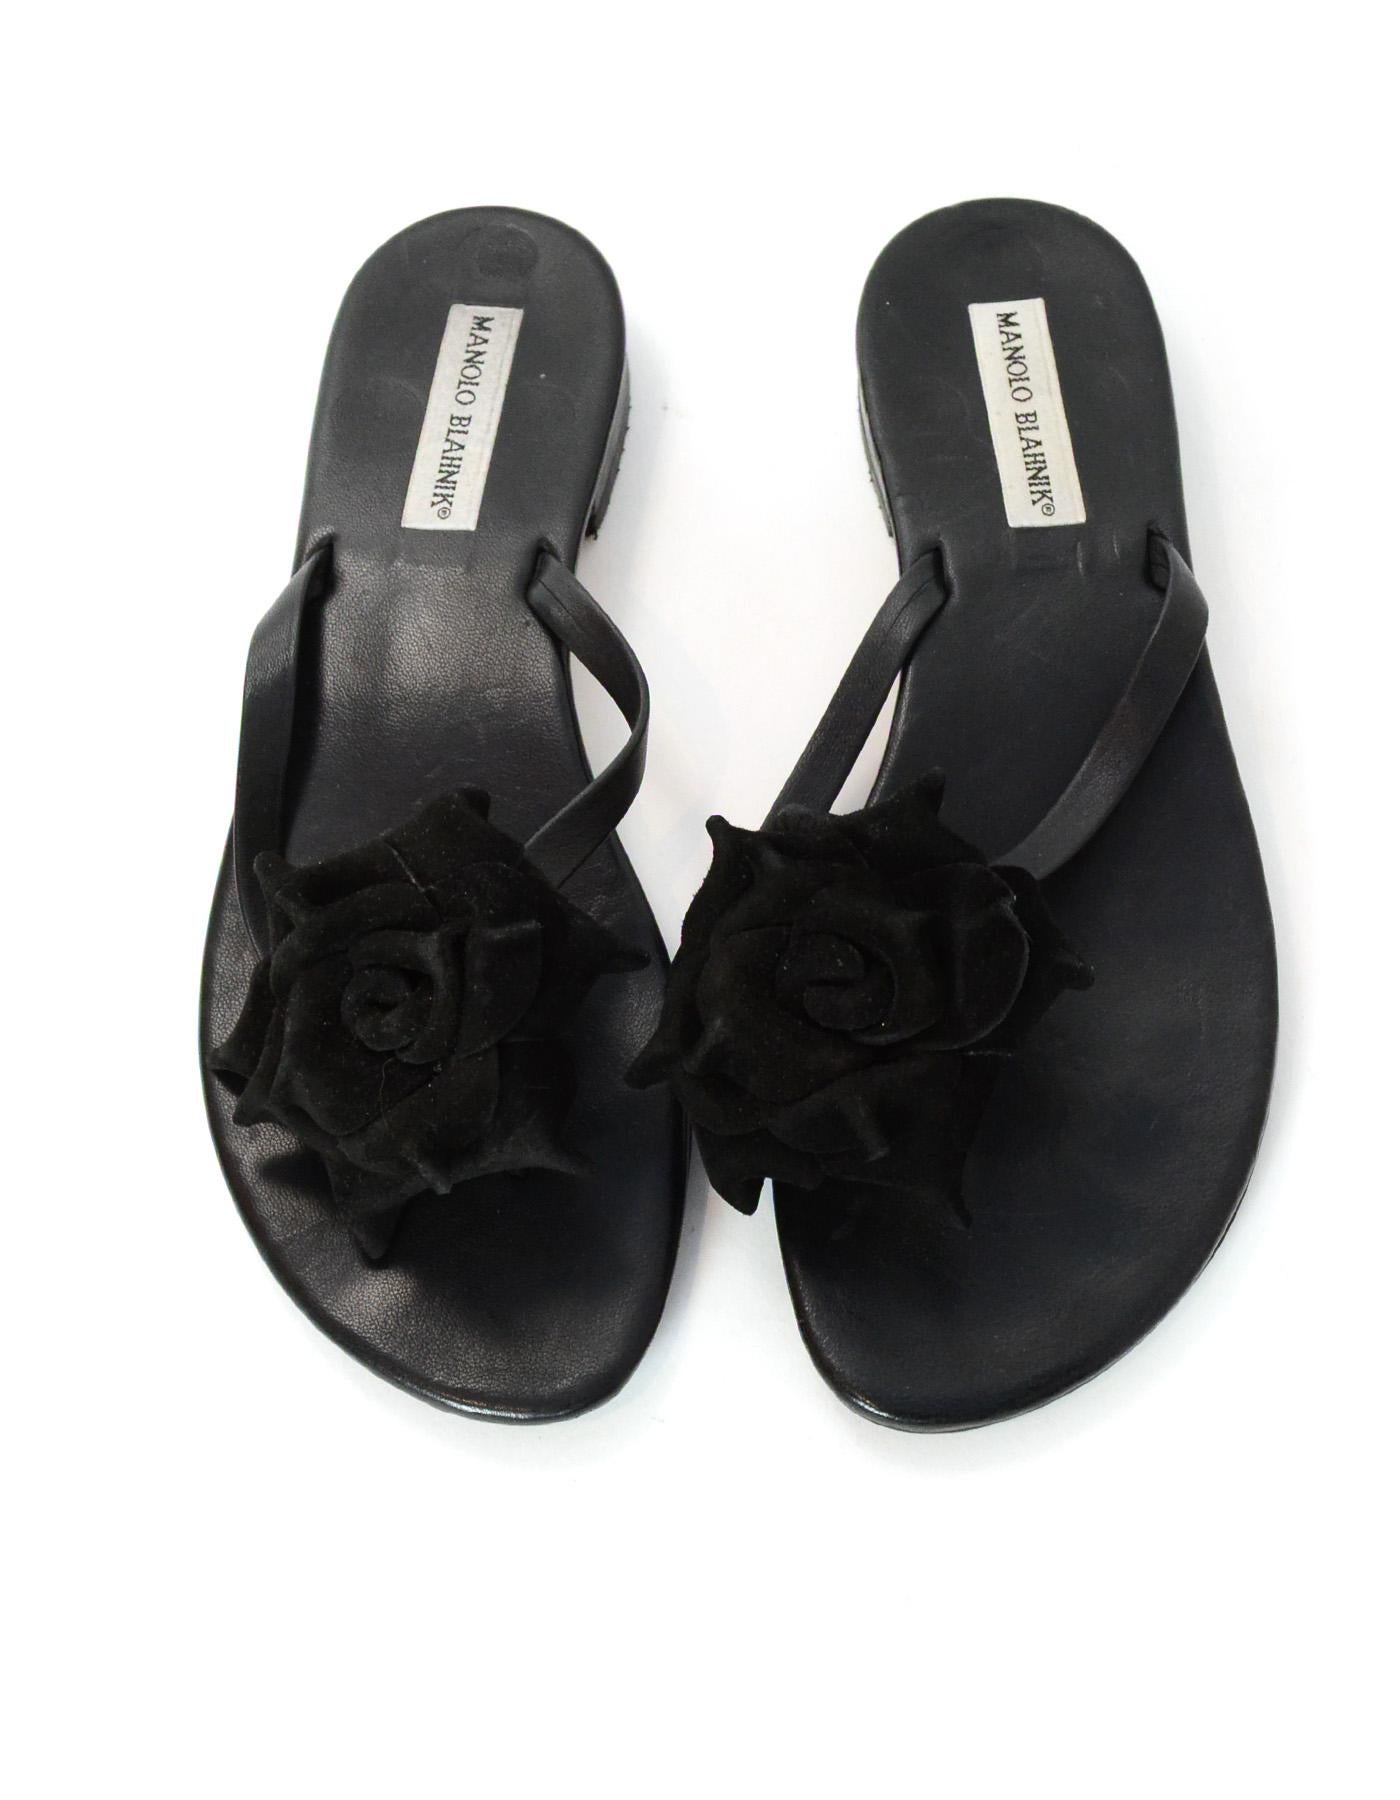 Manolo Blahnik Black Leather Thong Sandals W/ Suede Flower Sz 40

Made In: Italy
Color: Black
Materials: Leather and suede
Closure/Opening: Slide on 
Overall Condition: Excellent pre-owned condition with minimal scratching in leather 

Measurements: